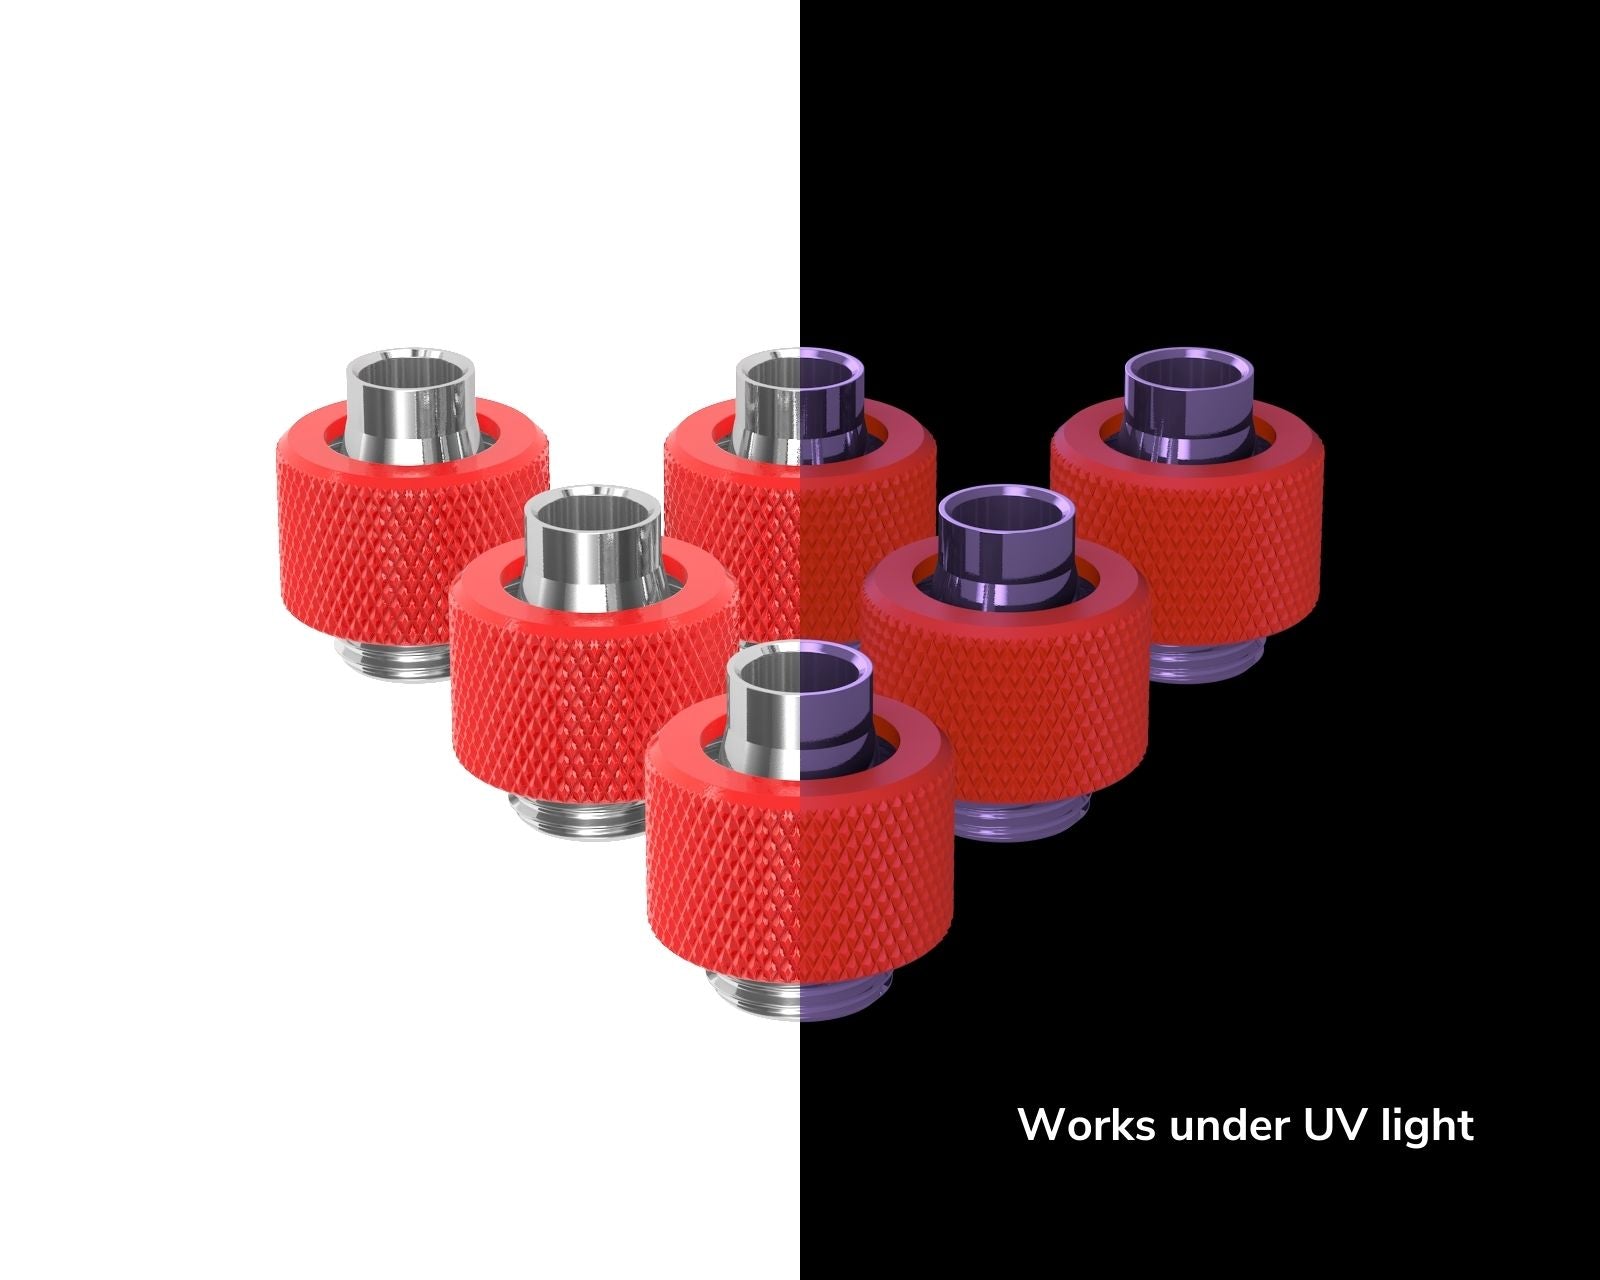 PrimoChill SecureFit SX - Premium Compression Fitting For 3/8in ID x 1/2in OD Flexible Tubing 6 Pack (F-SFSX12-6) - Available in 20+ Colors, Custom Watercooling Loop Ready - UV Red